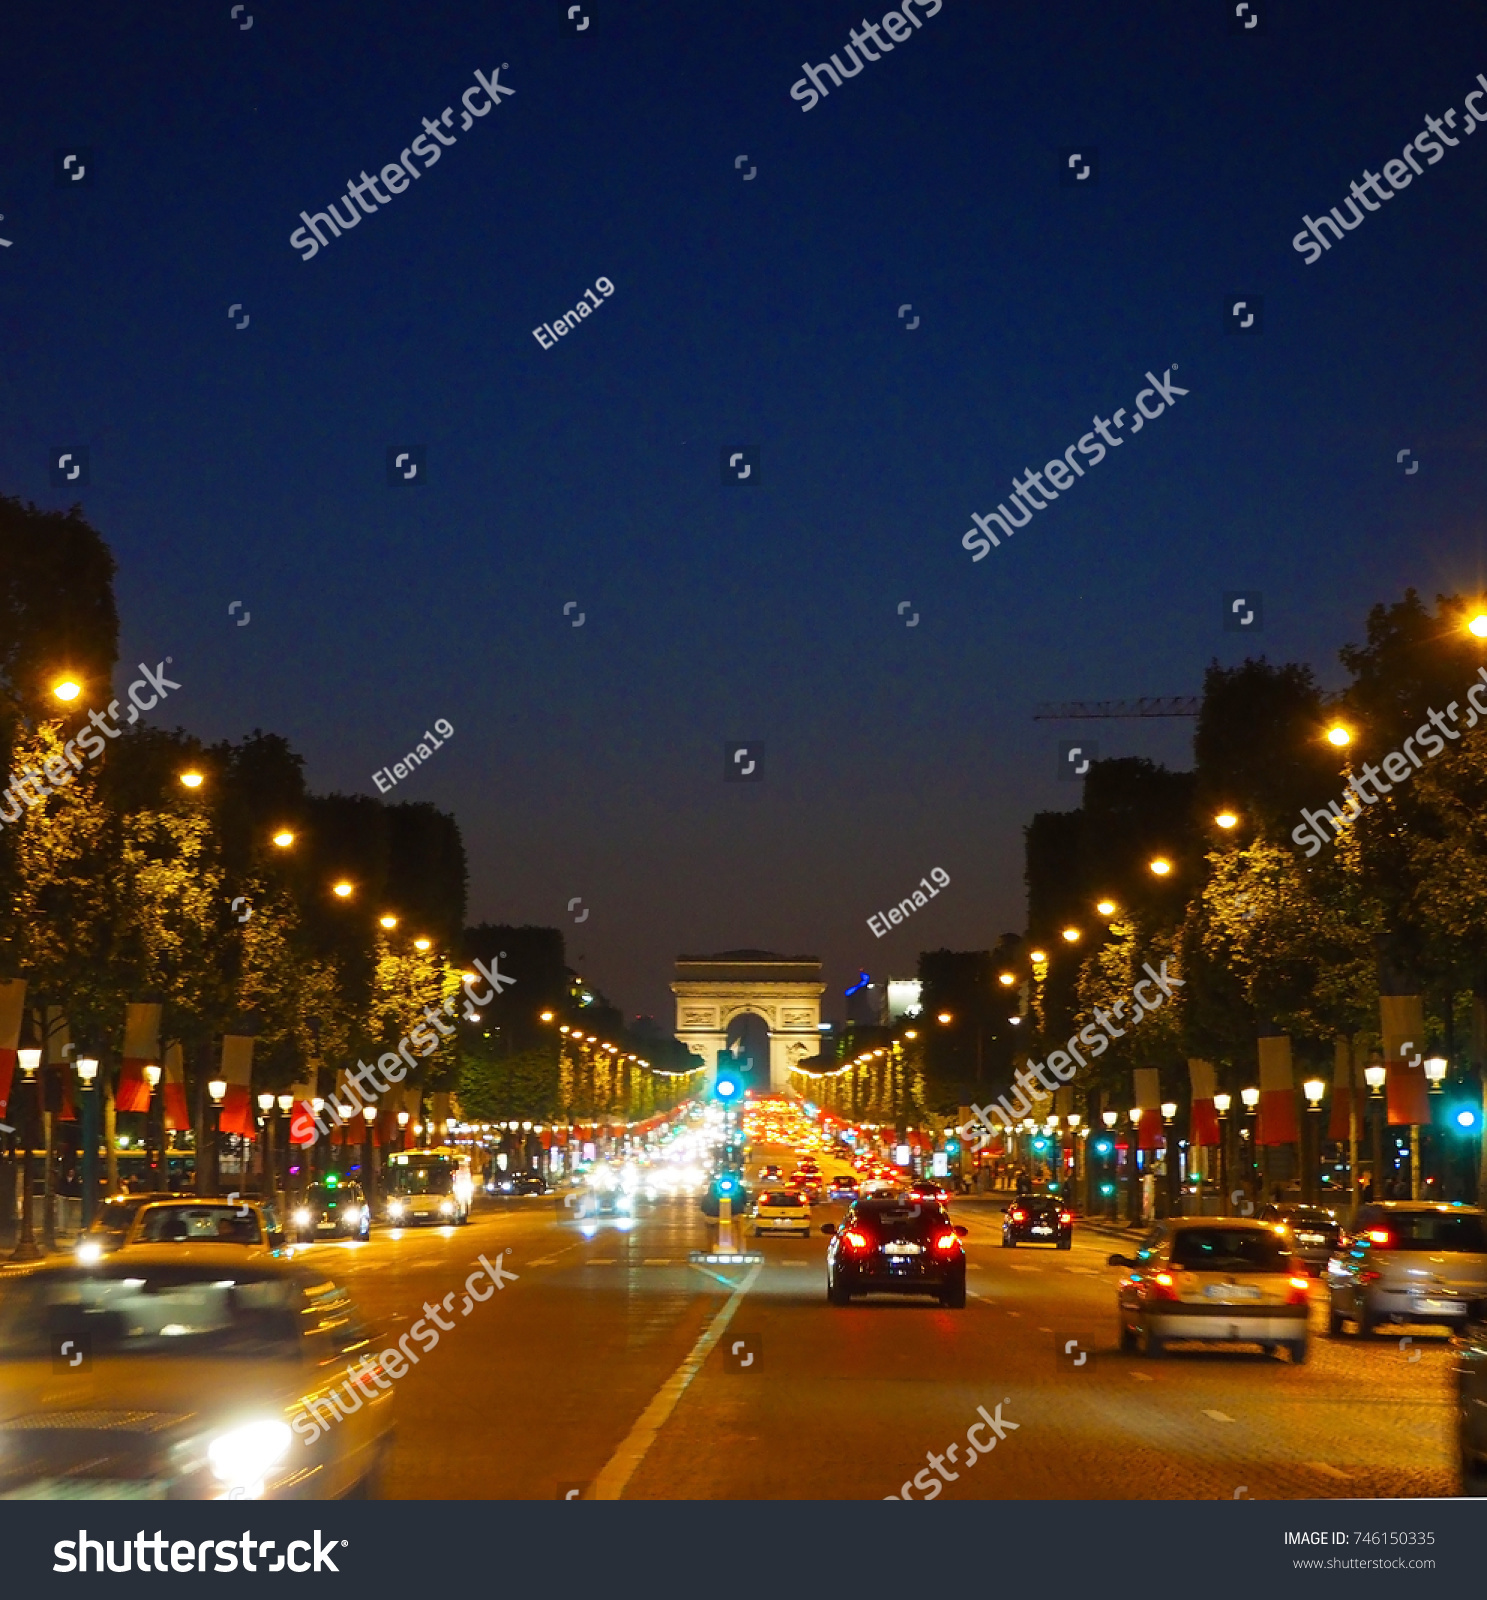 Avenue Champs-Elysees with illumination and triumphal arch on the horizon in Paris, France. Champs Elysees is one of the most famous and famous streets in the world. #746150335